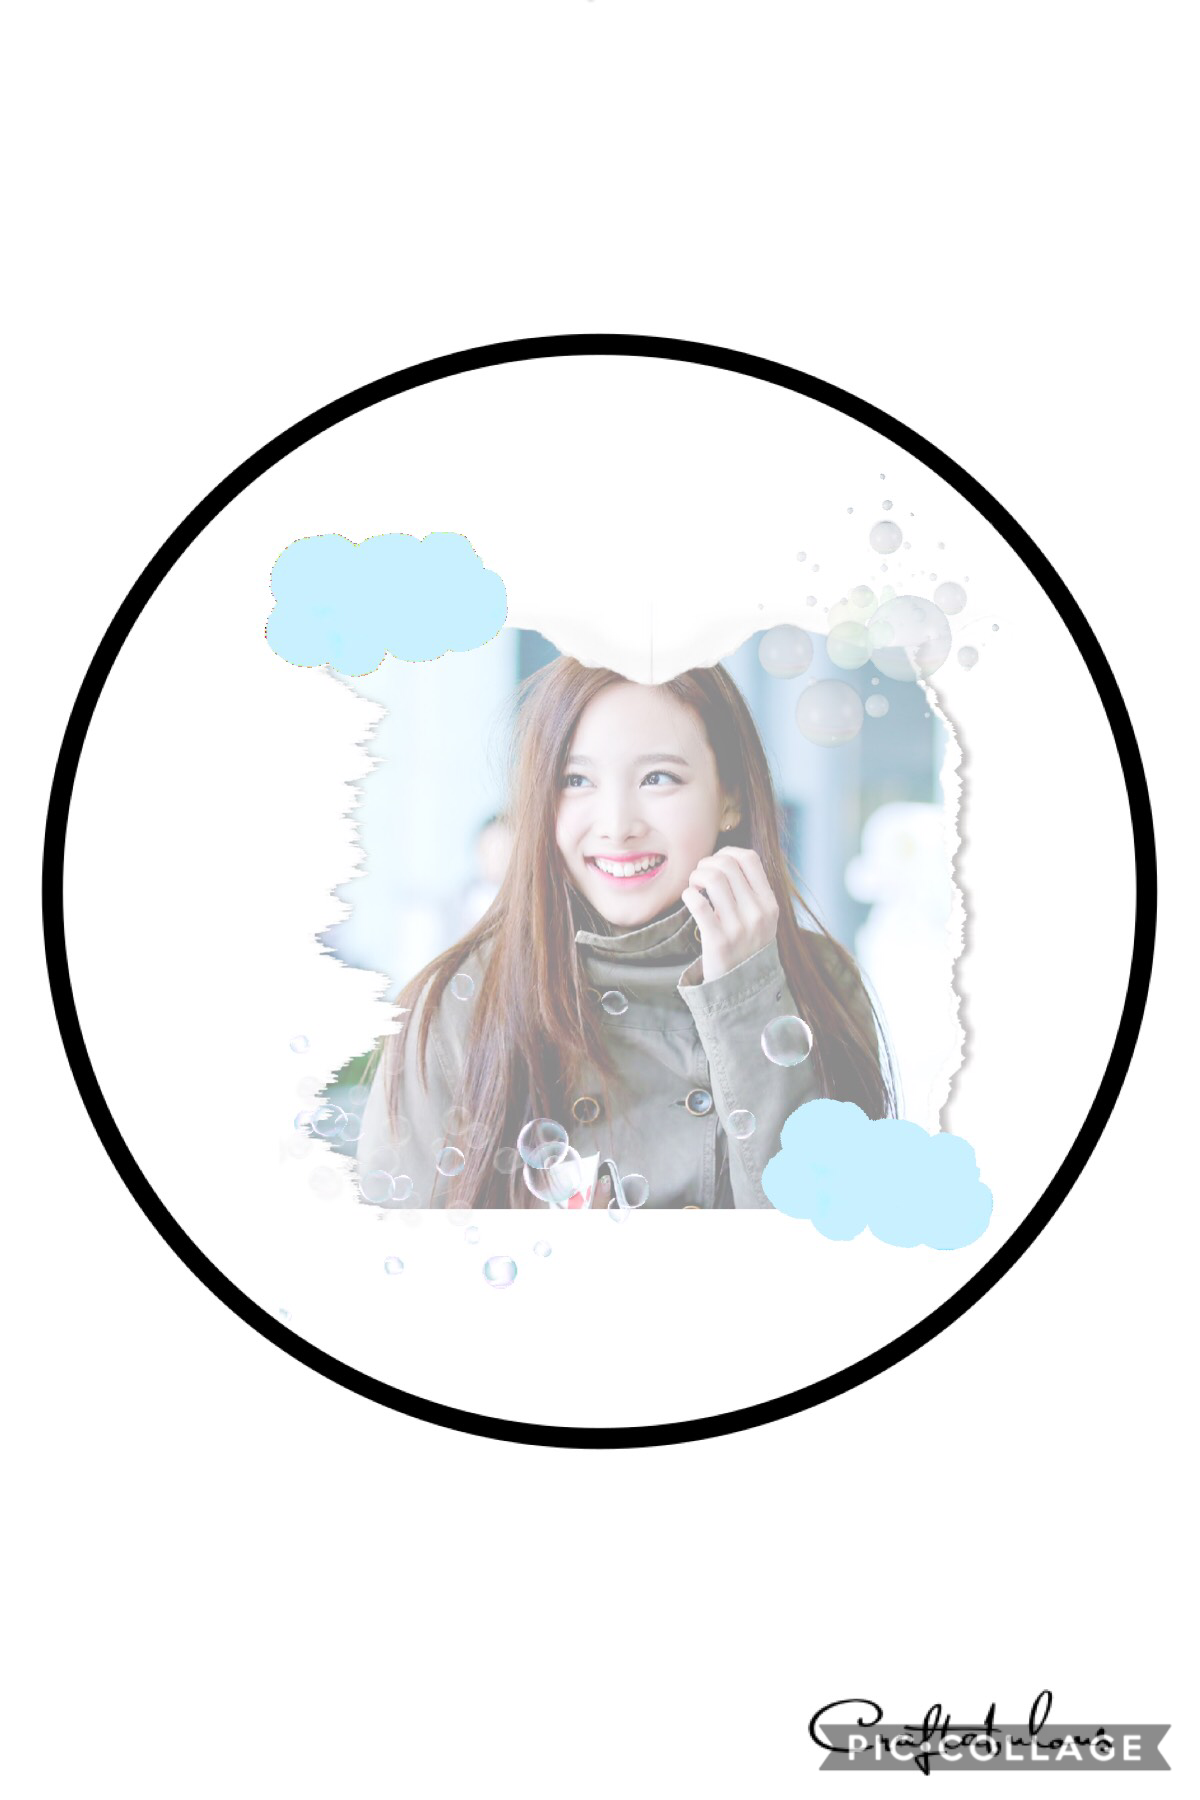 Craftabulous tries PC trends kpop posts!!! A lot of people post kpop stuff, so I have it a try. ^that person is Nayeon from Twice. I don’t really listen to kpop, but I don’t hate it or anything. 